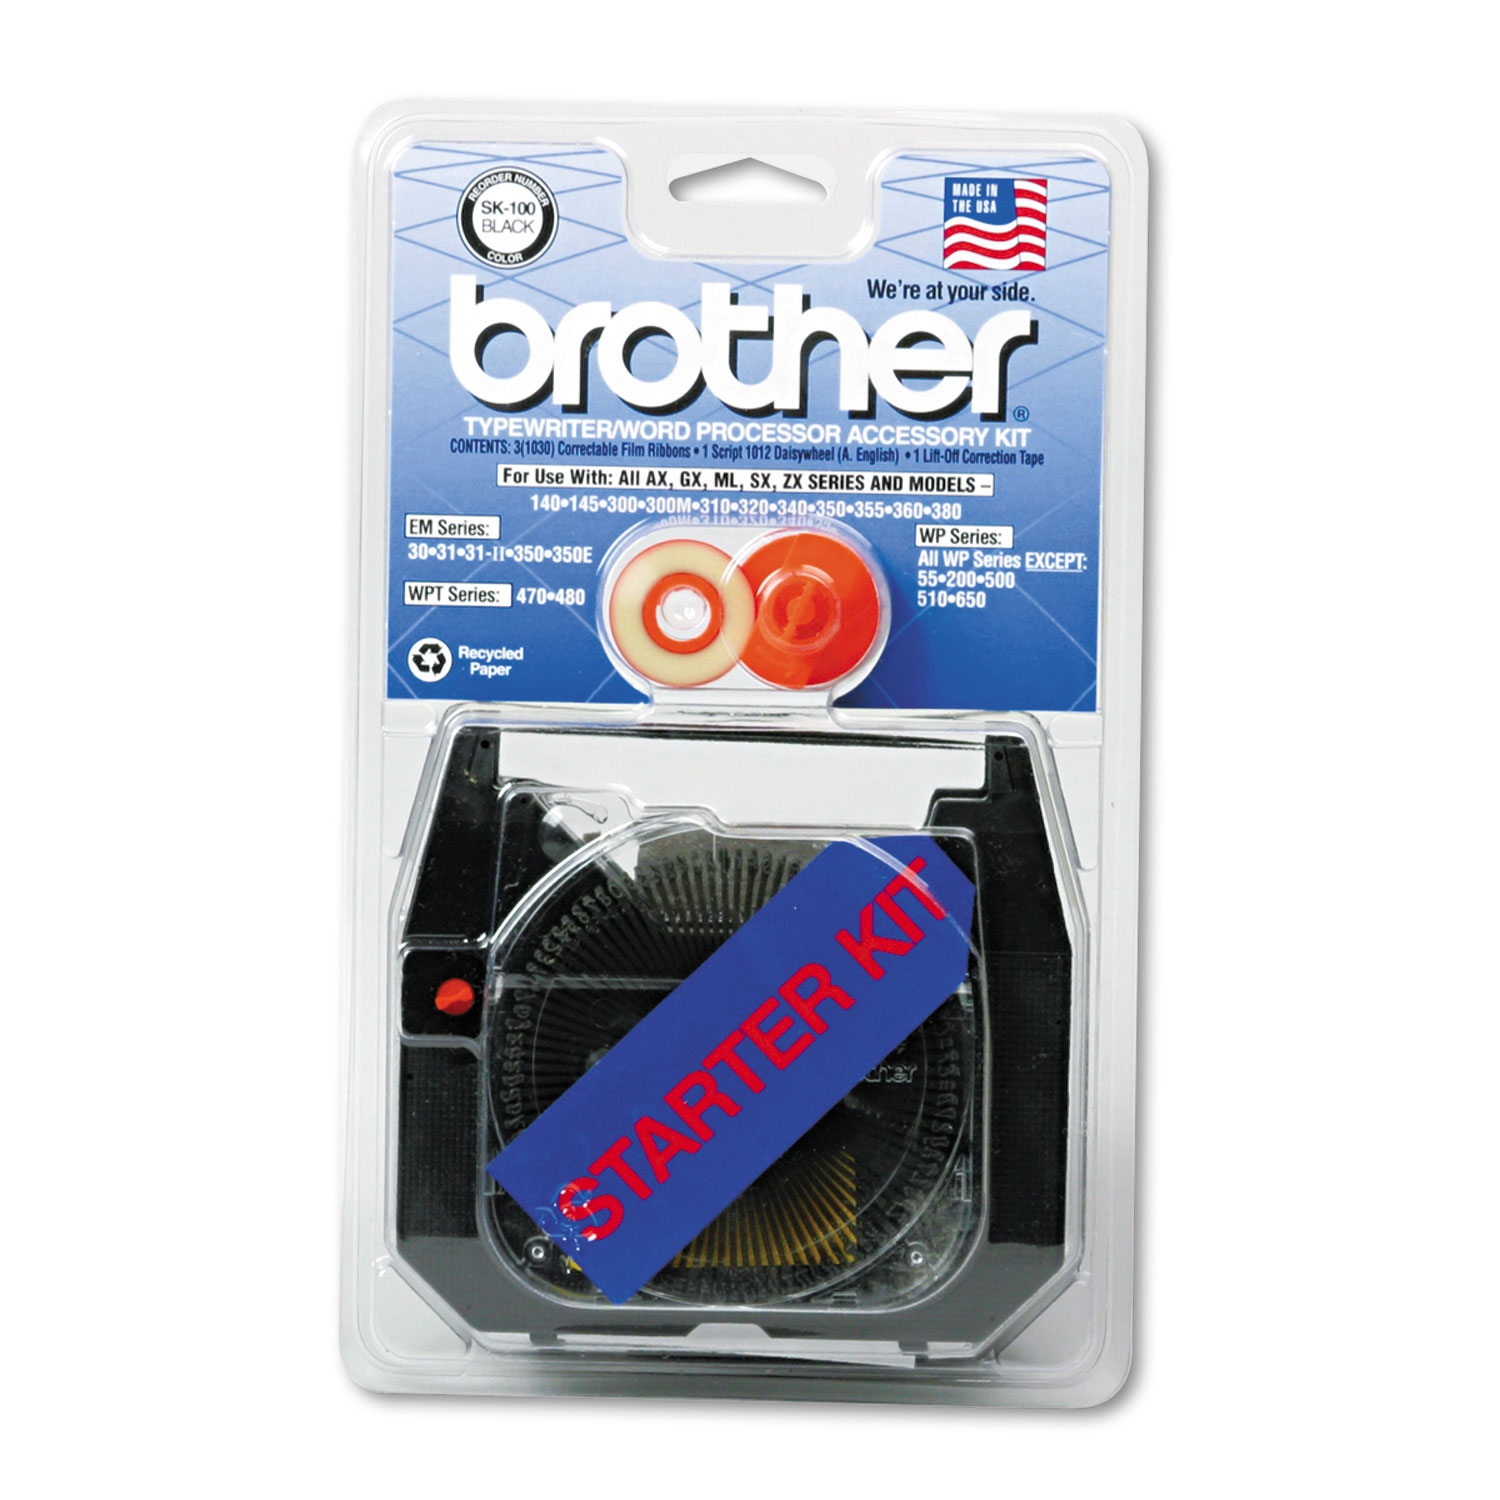 Starter Kit for Brother AX, GX, SX, Most WP and Other Typewriters